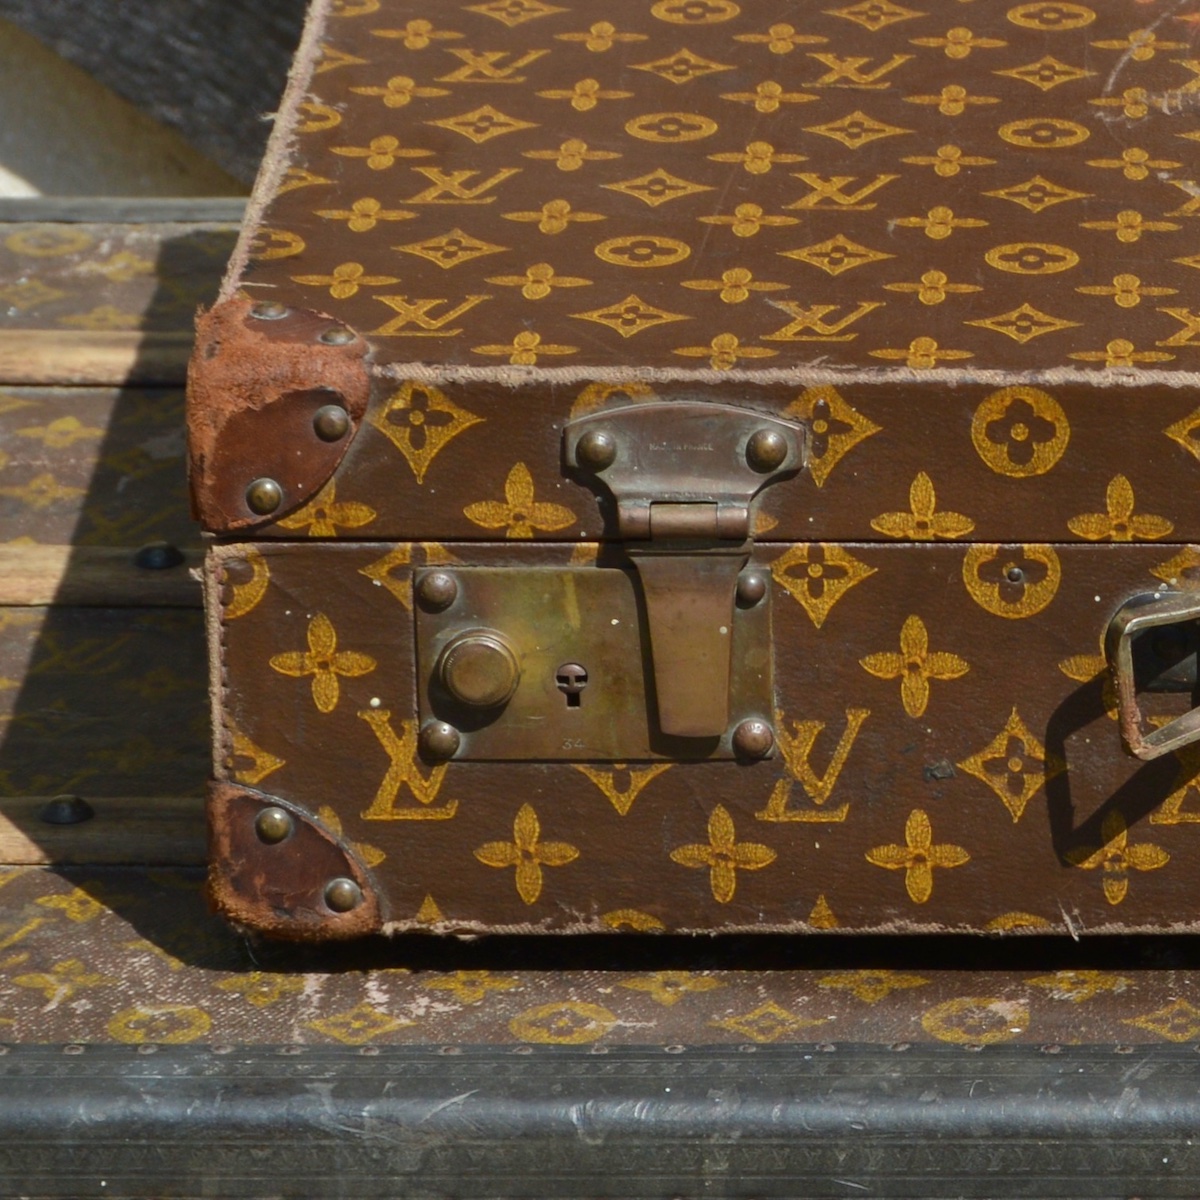 Louis Vuitton trunk - Unpickable lock with tumblers - Malle2luxe